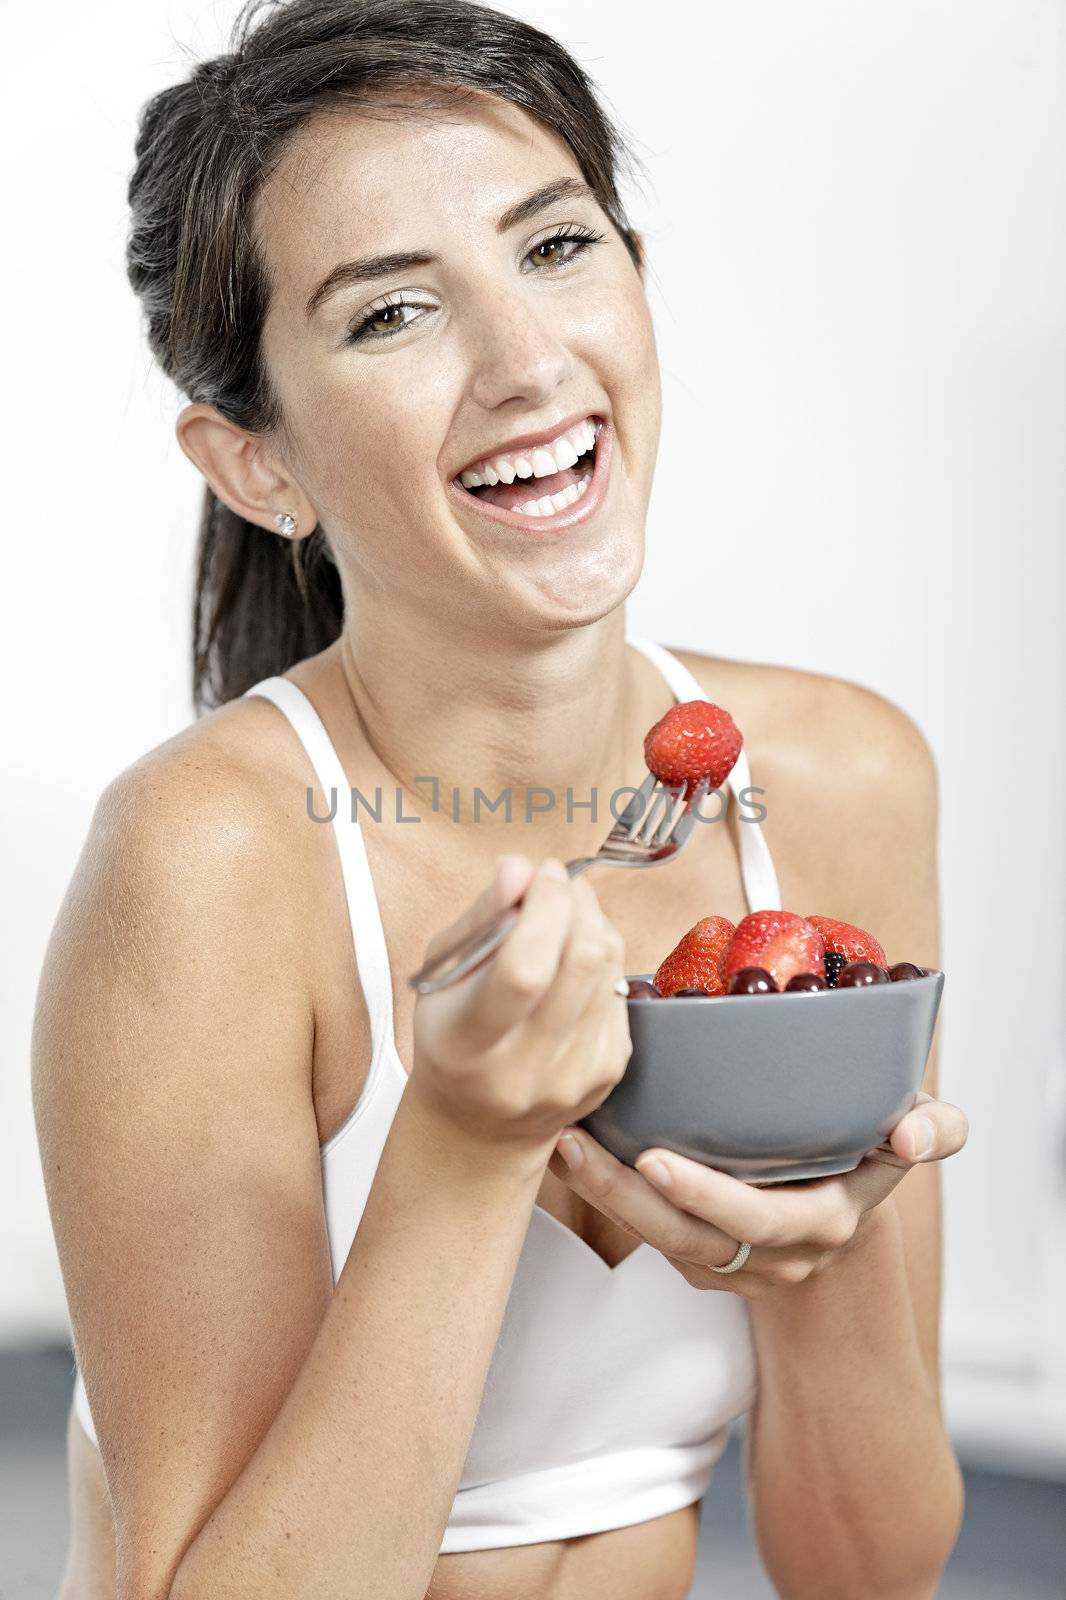 Woman ieating fruit in fitness clothes by studiofi